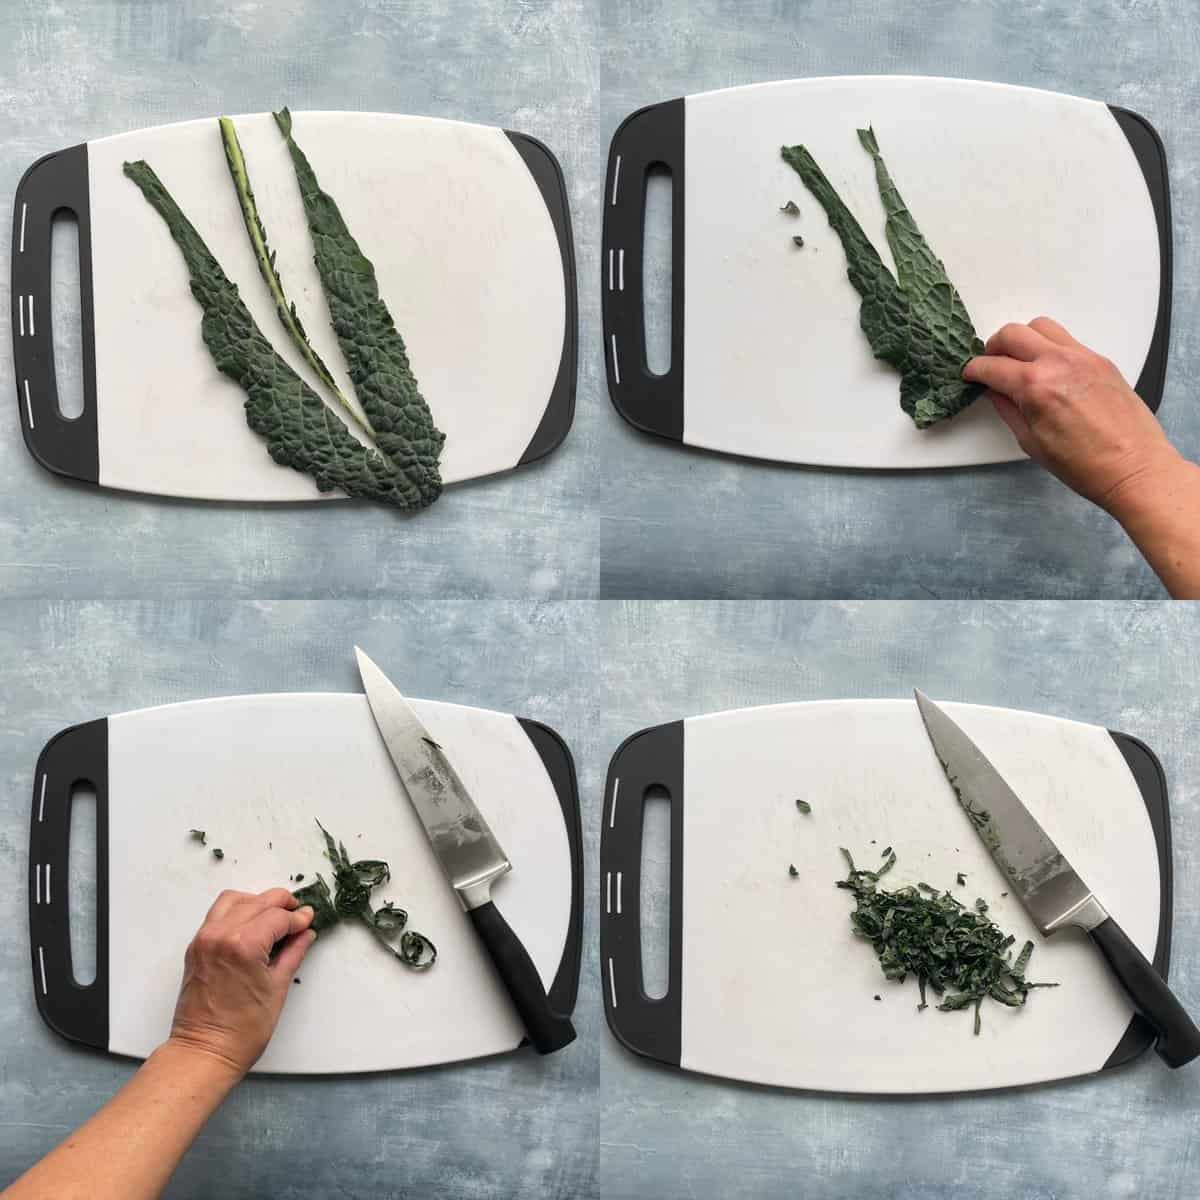 four panels showing slicing out the stem, rolling, cutting, and chopping kale.